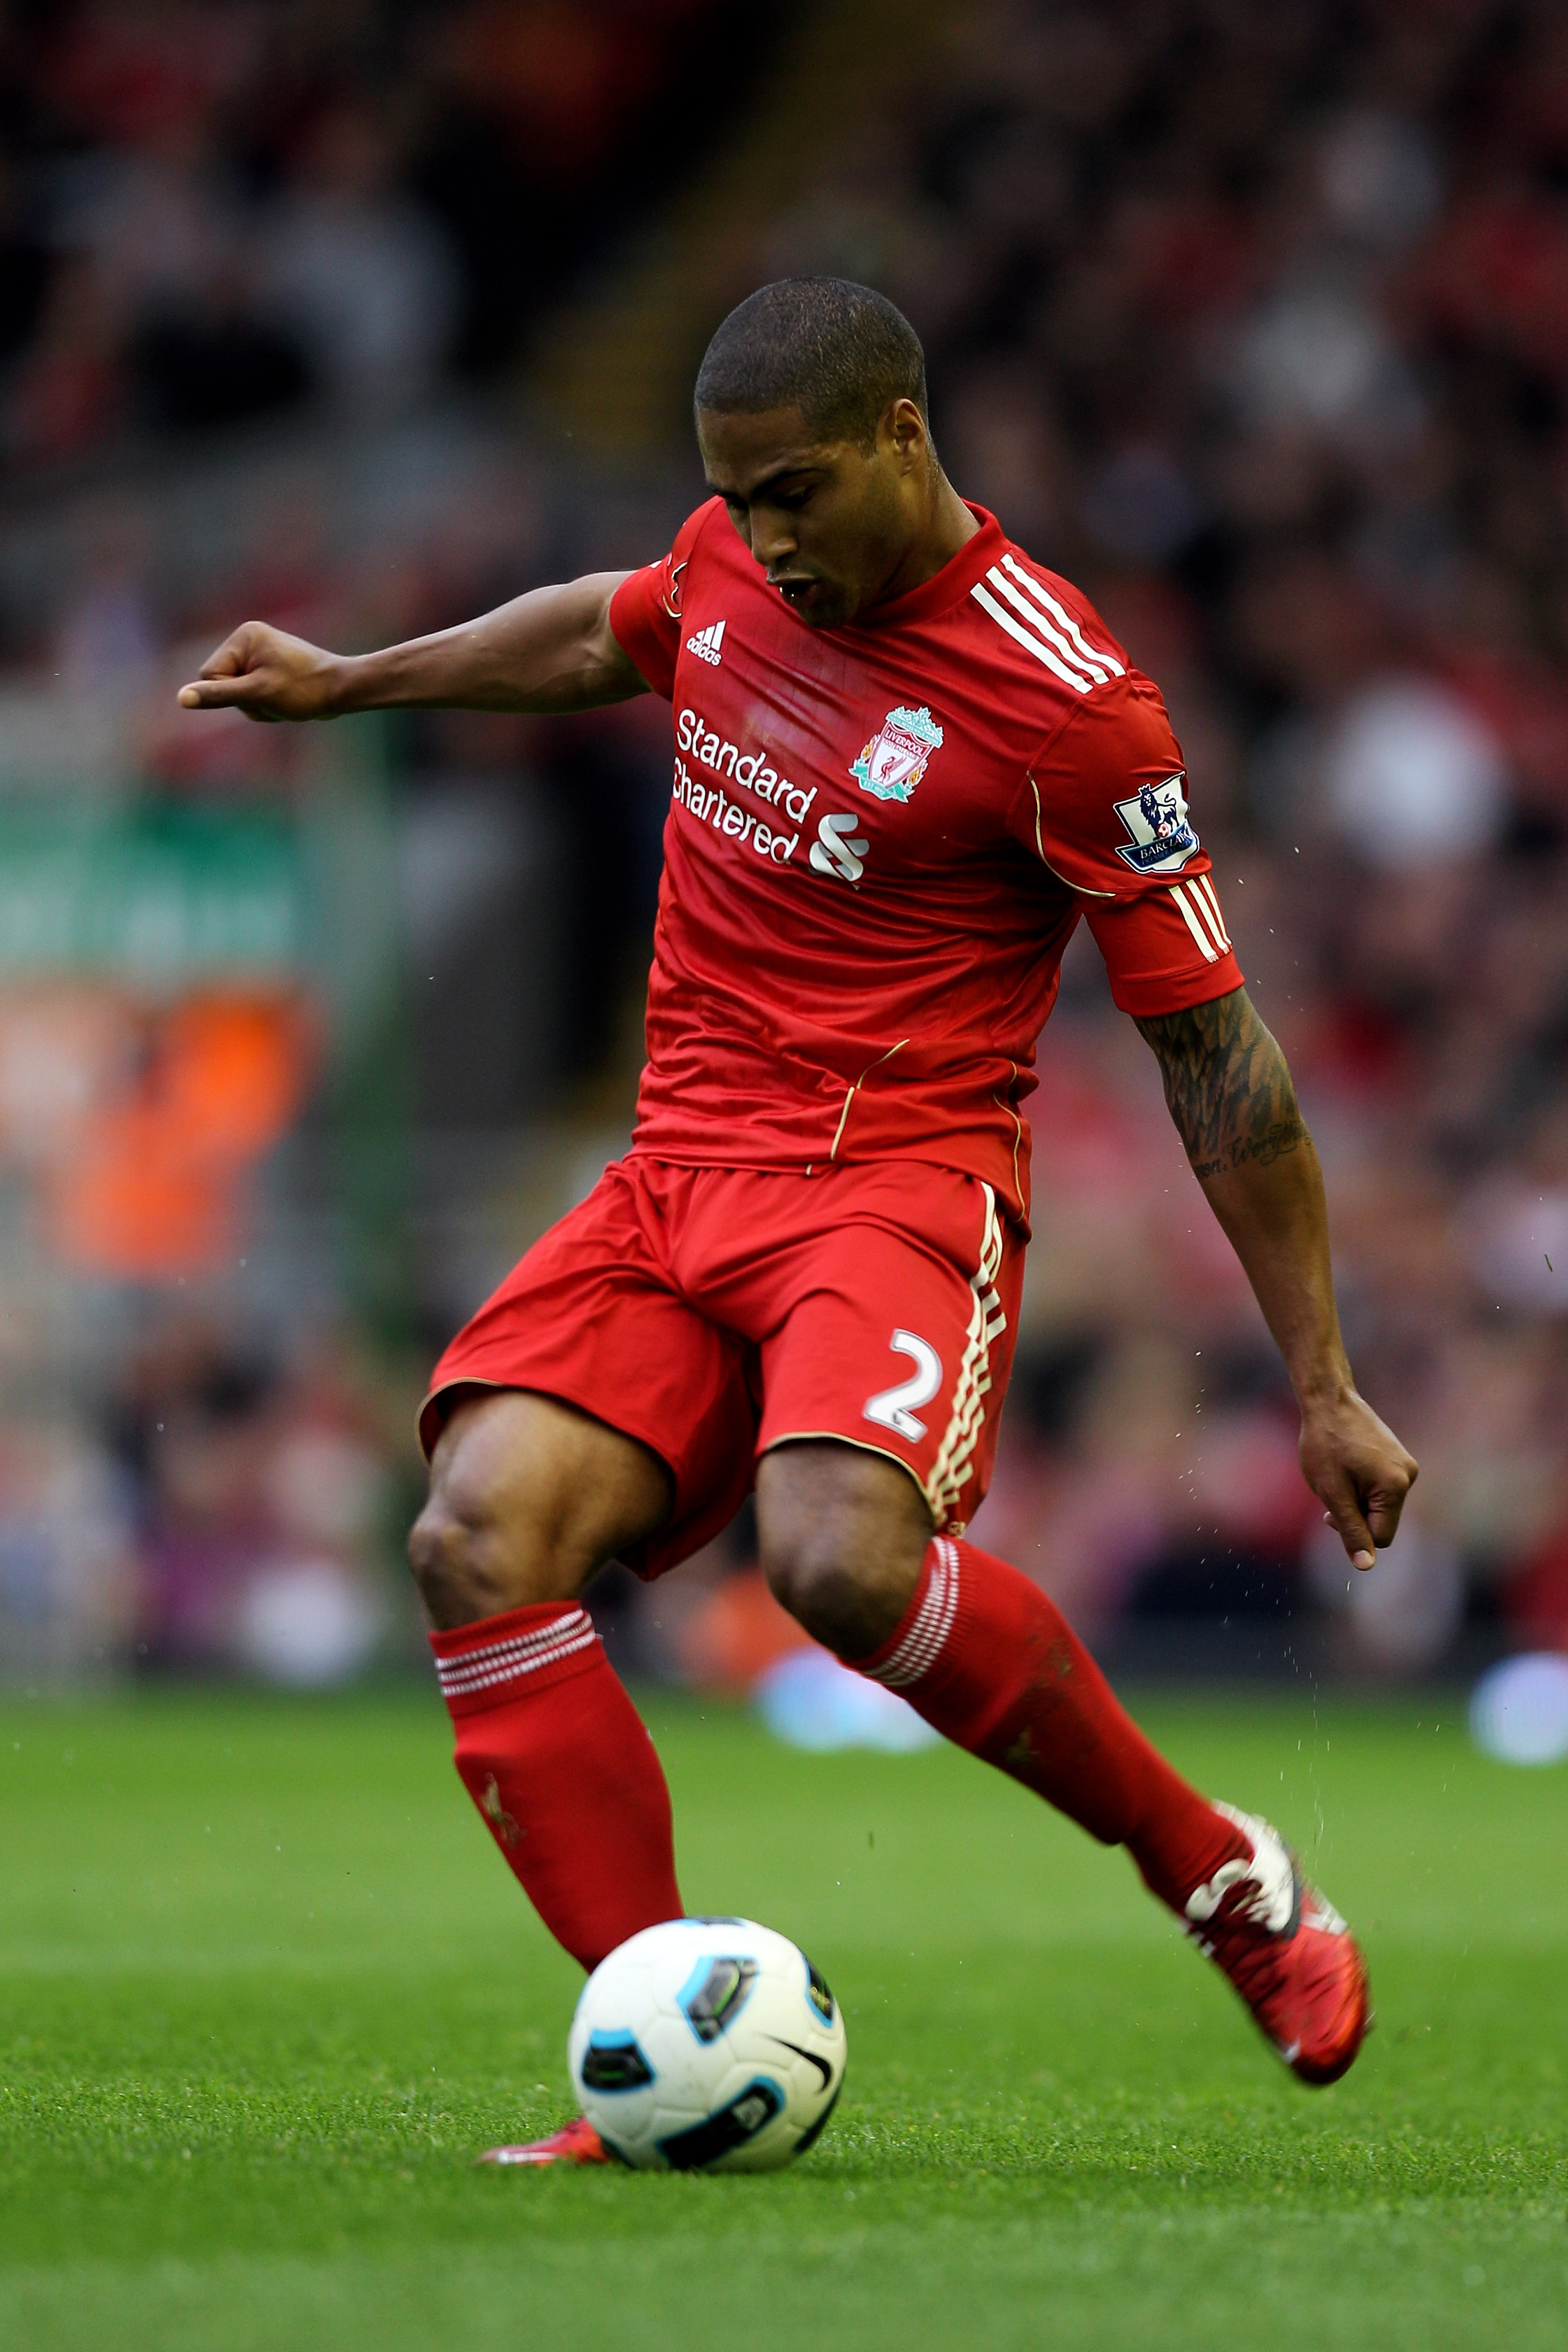 LIVERPOOL, ENGLAND - MAY 15:  Glen Johnson of Liverpool crosses the ball during the Barclays Premier League match between Liverpool and Tottenham Hotspur at Anfield on May 15, 2011 in Liverpool, England.  (Photo by Michael Steele/Getty Images)